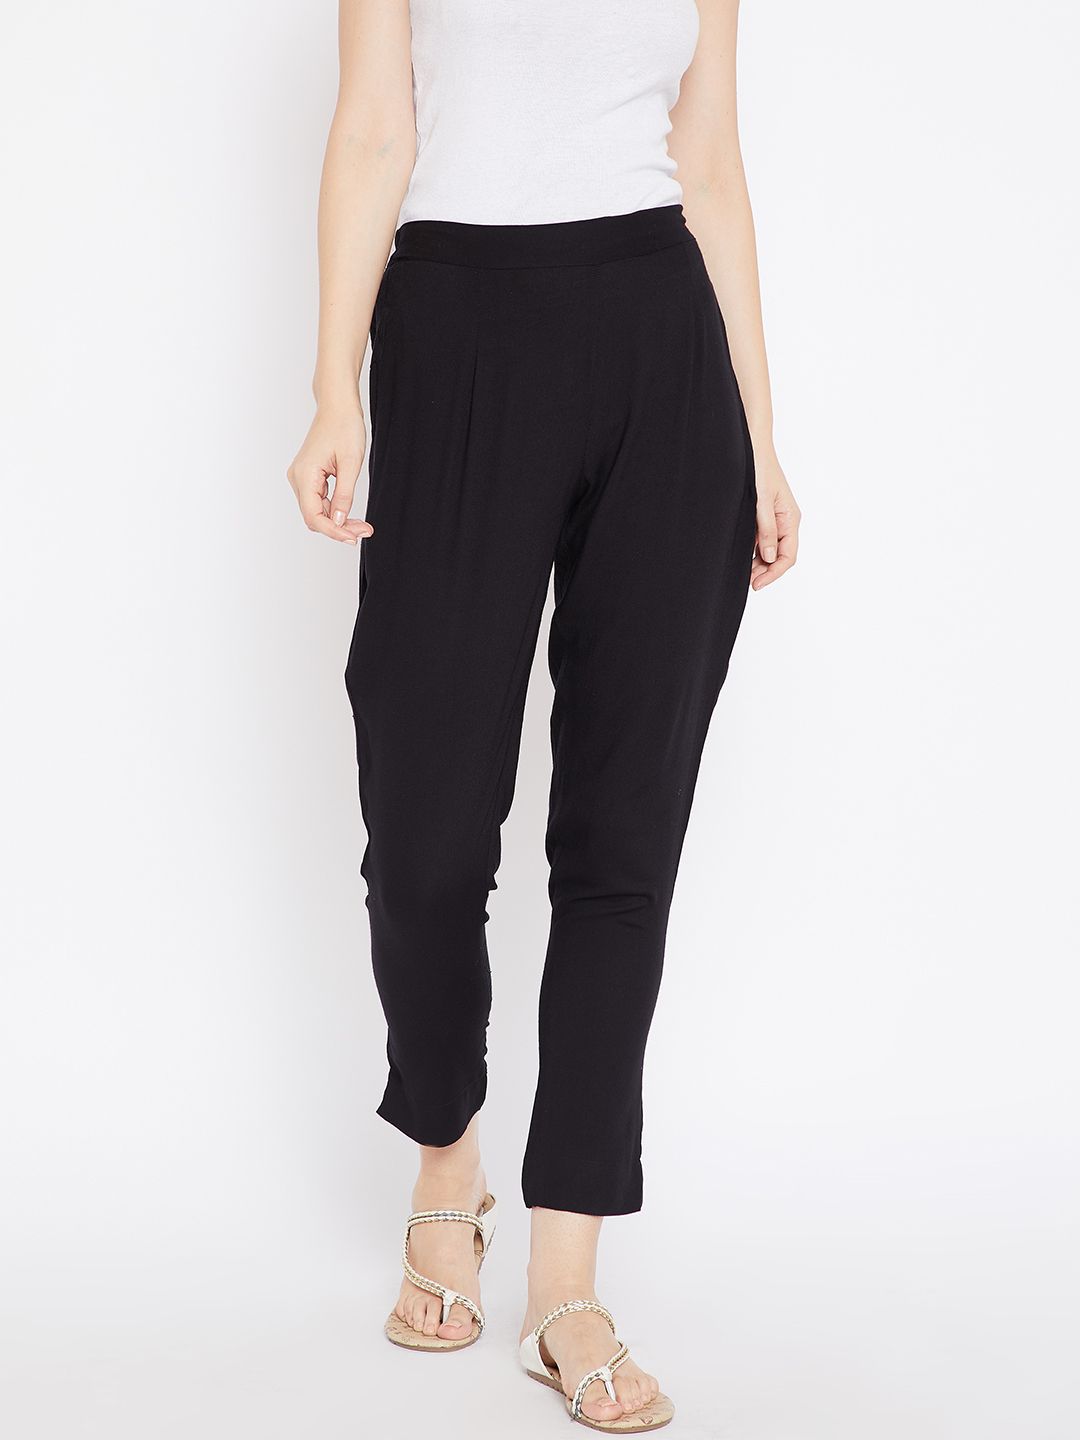 Aujjessa Women Black Regular Fit Solid Cropped Peg Trousers Price in India